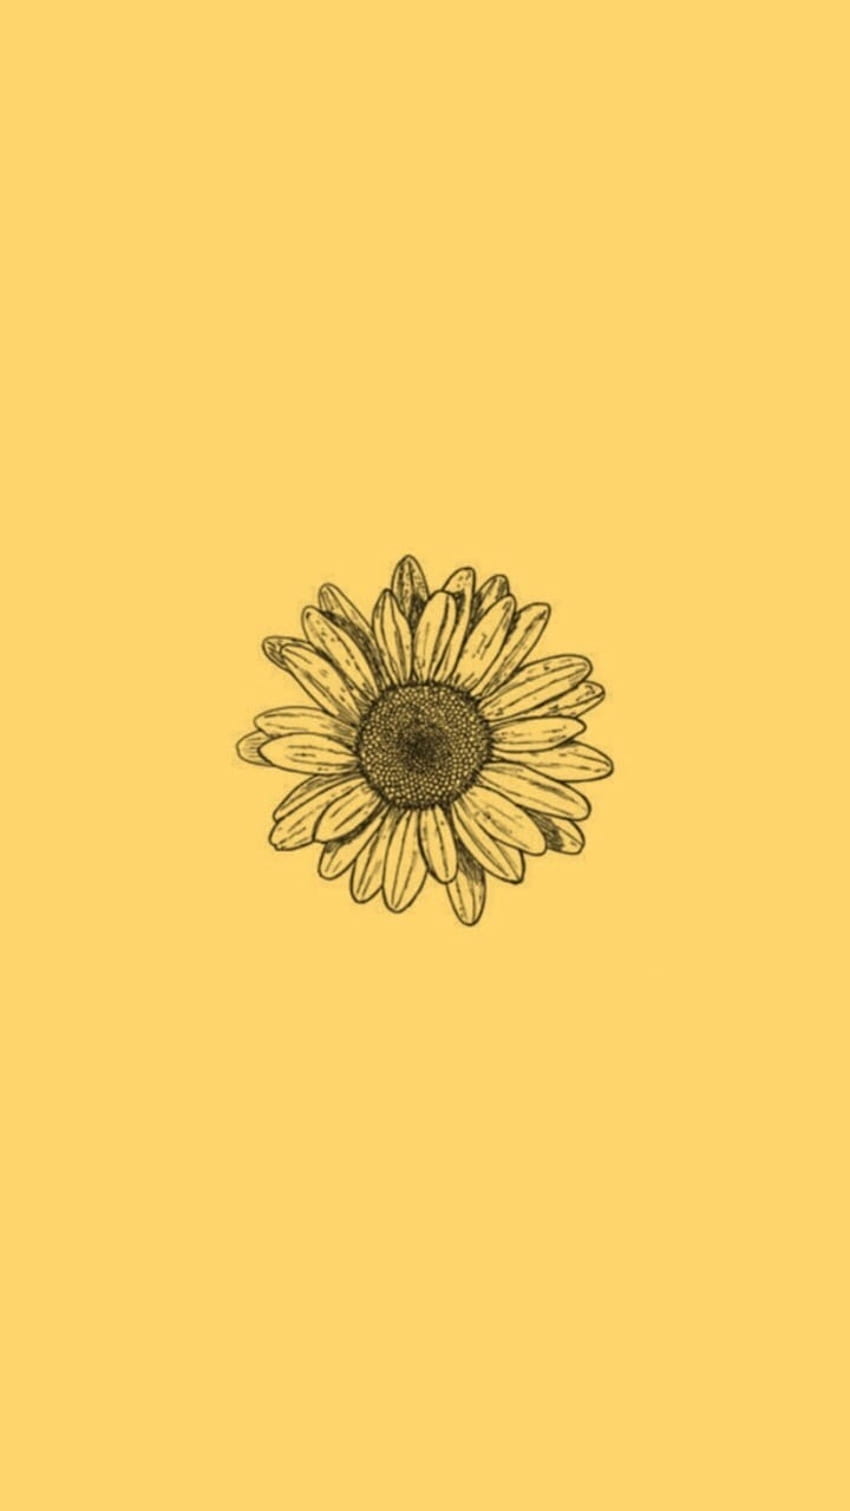 About tumblr in Sunflowers, Simple Sunflower HD phone wallpaper ...